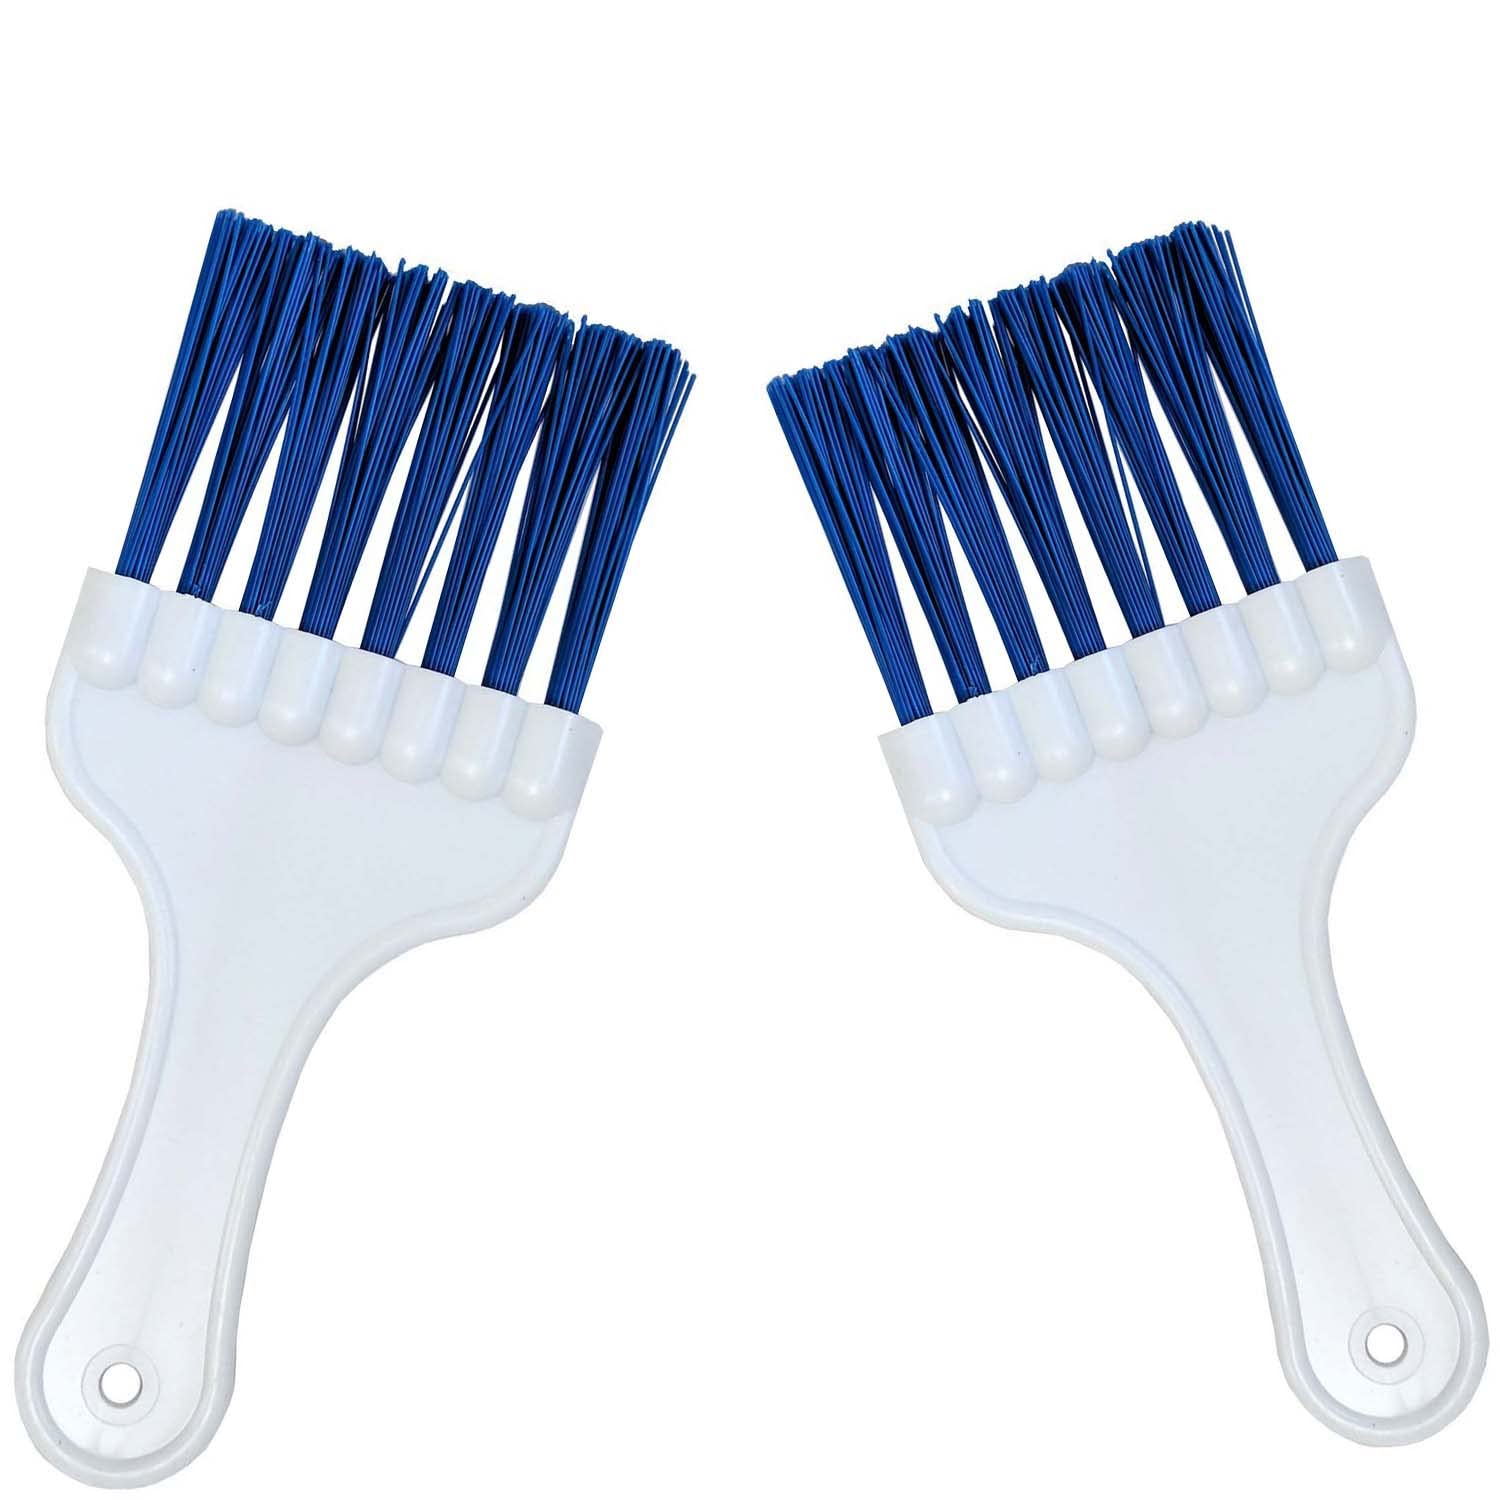 https://citizenside.com/wp-content/uploads/2023/10/9-amazing-coil-cleaning-brush-for-2023-1696922301.jpg